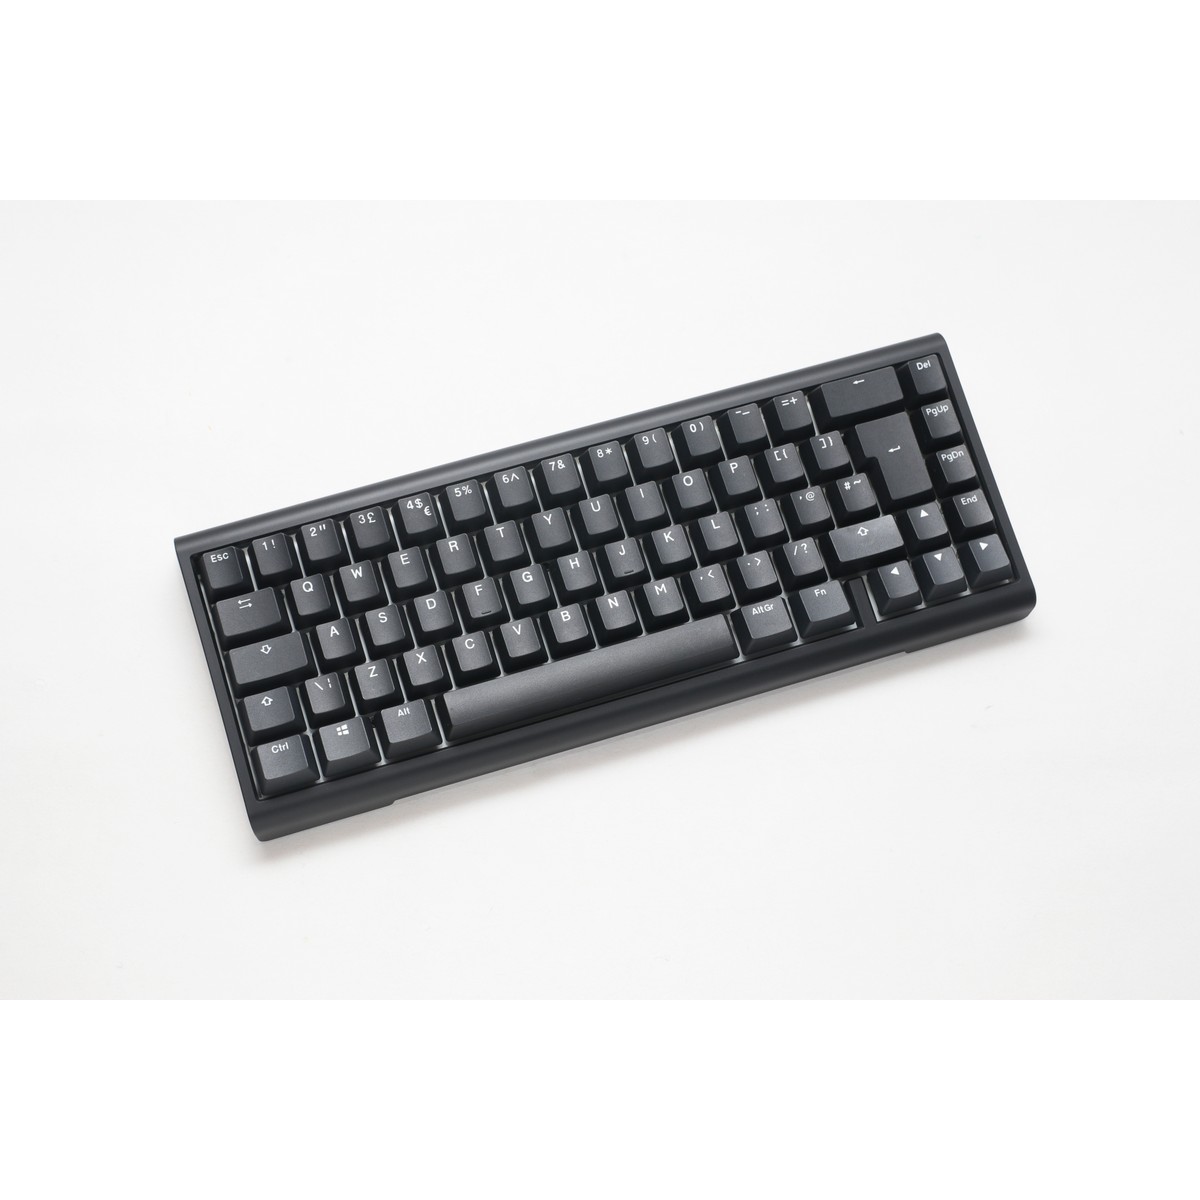 Ducky ProjectD Tinker 65 Mechanical Gaming Customisable Keyboard Cherry MX Brown - Black